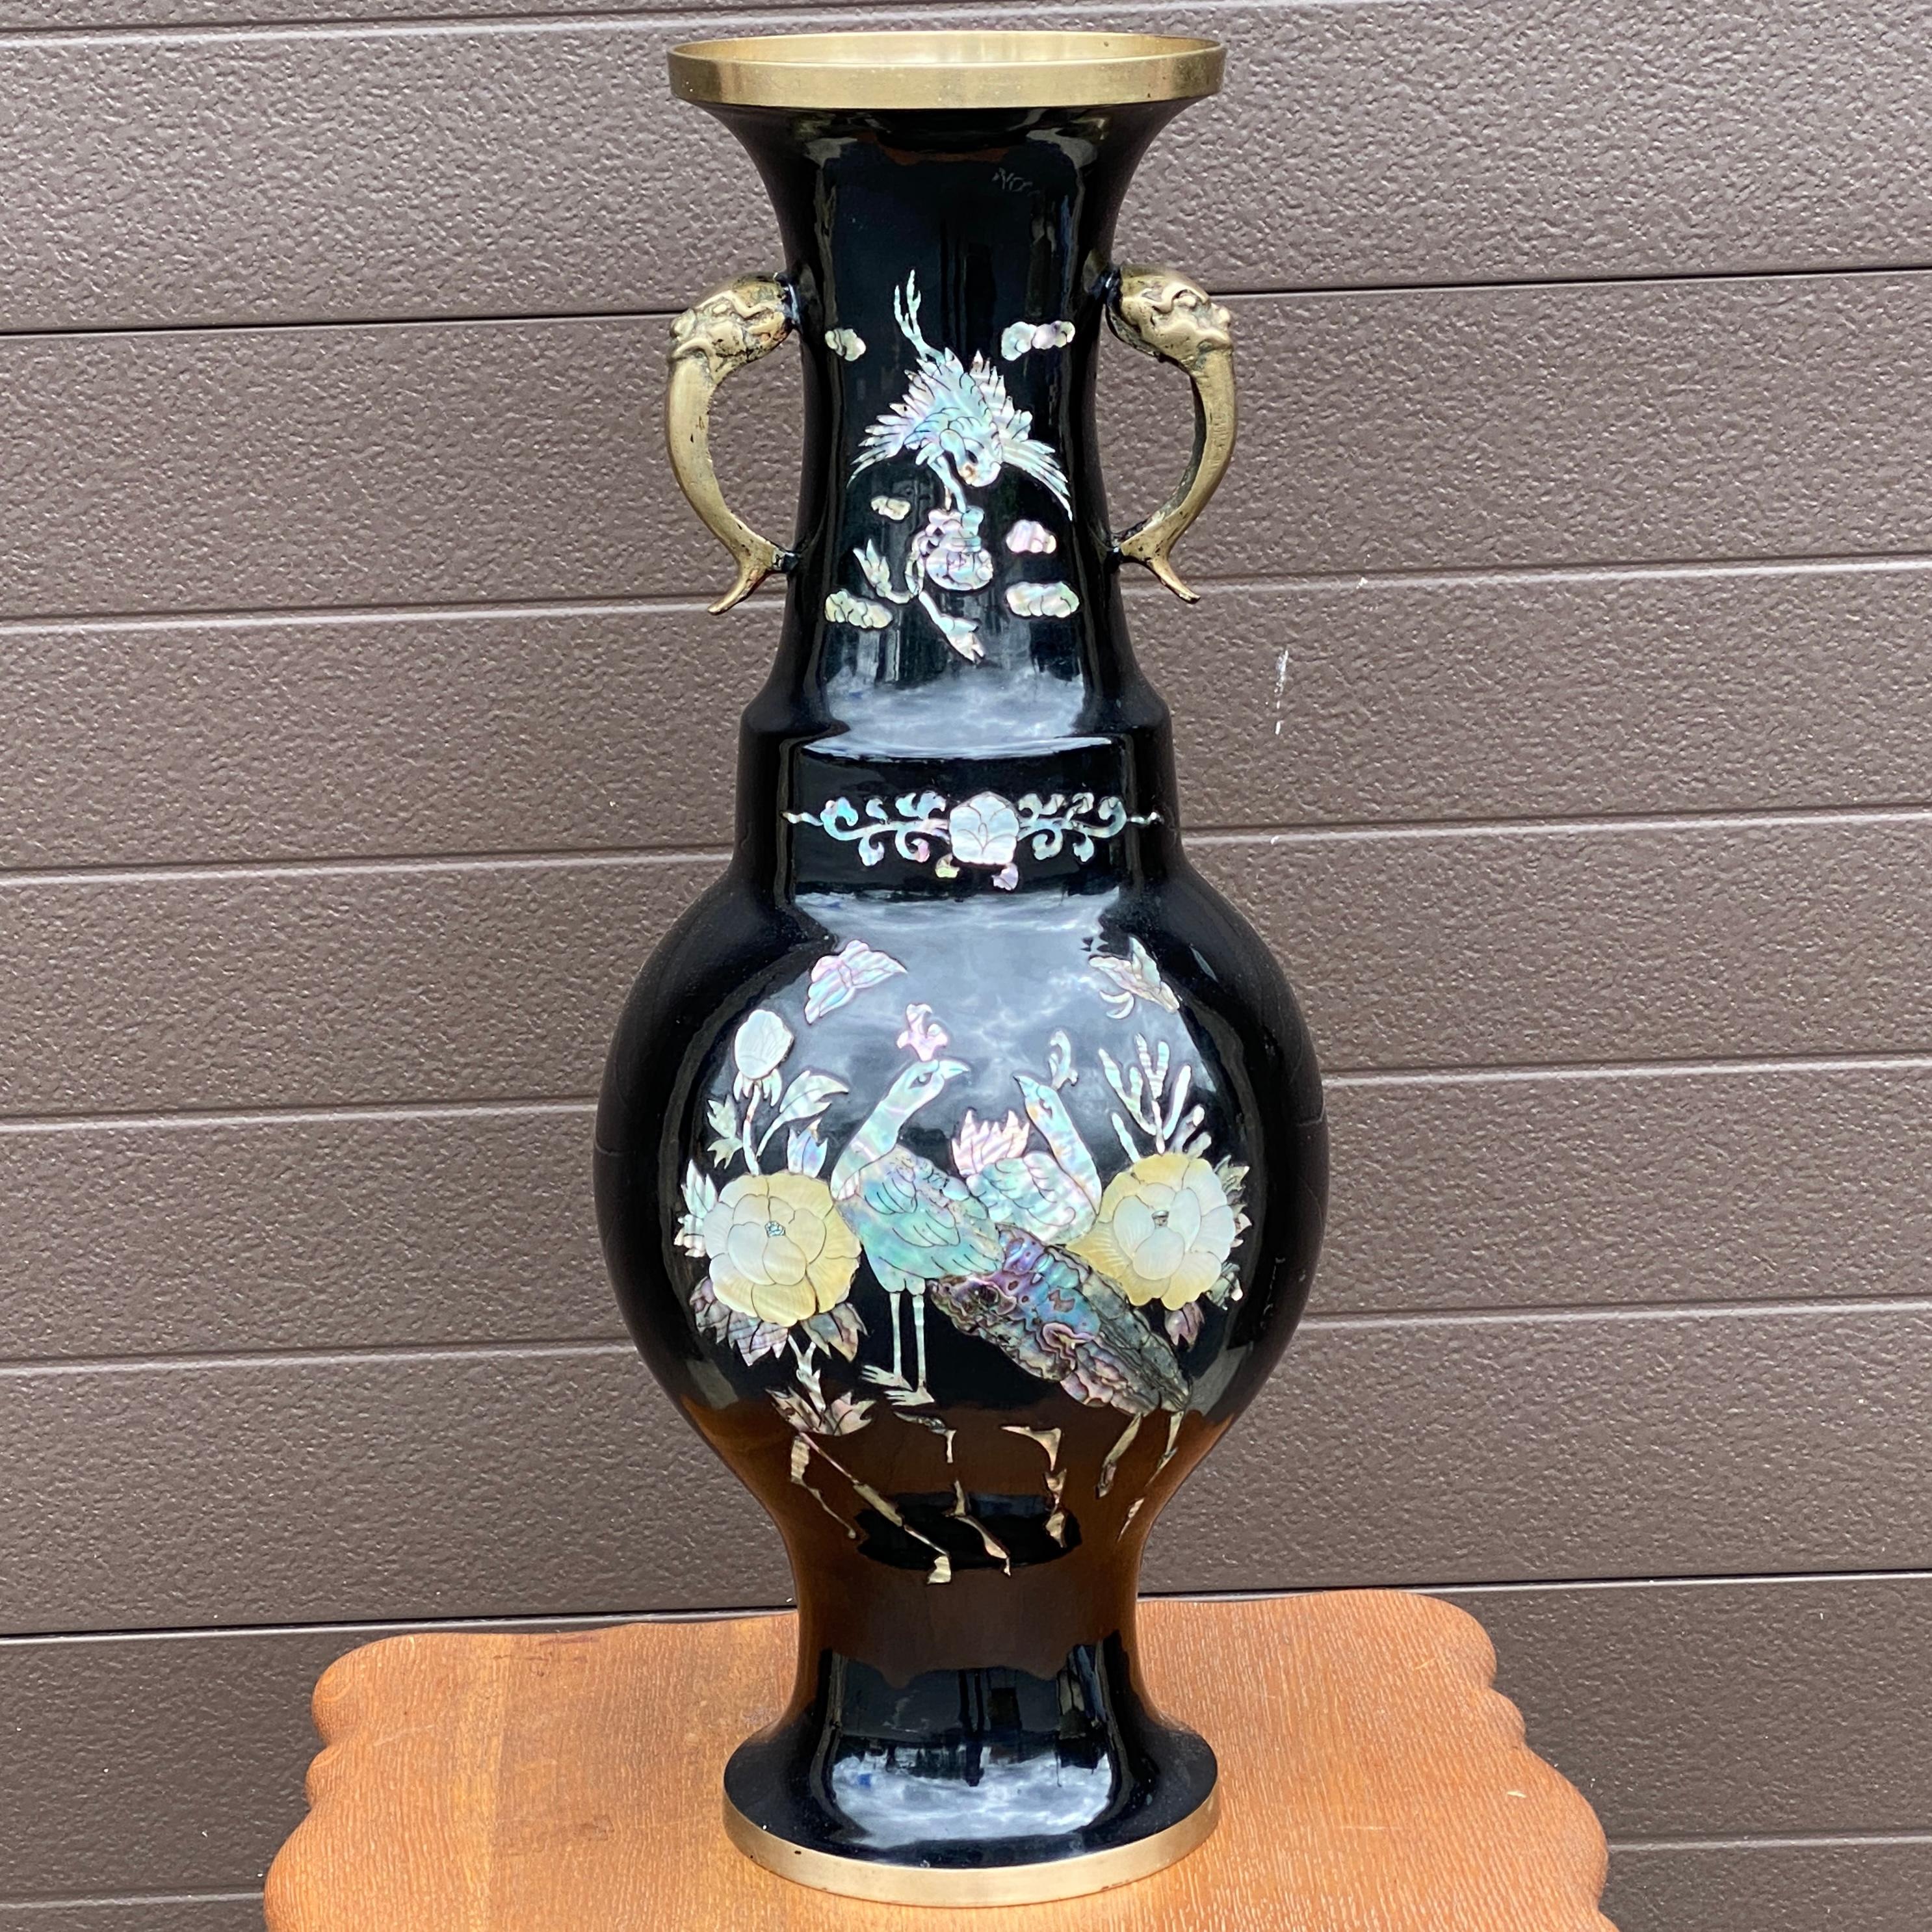 A lovely vintage Asian cloisonné vase featuring brilliant mother of pearl accents from the mid-20th century.

Large scale, having a circular top with tapered neck which leads down to a robust bulbous exterior affixed with flanking stylized figural